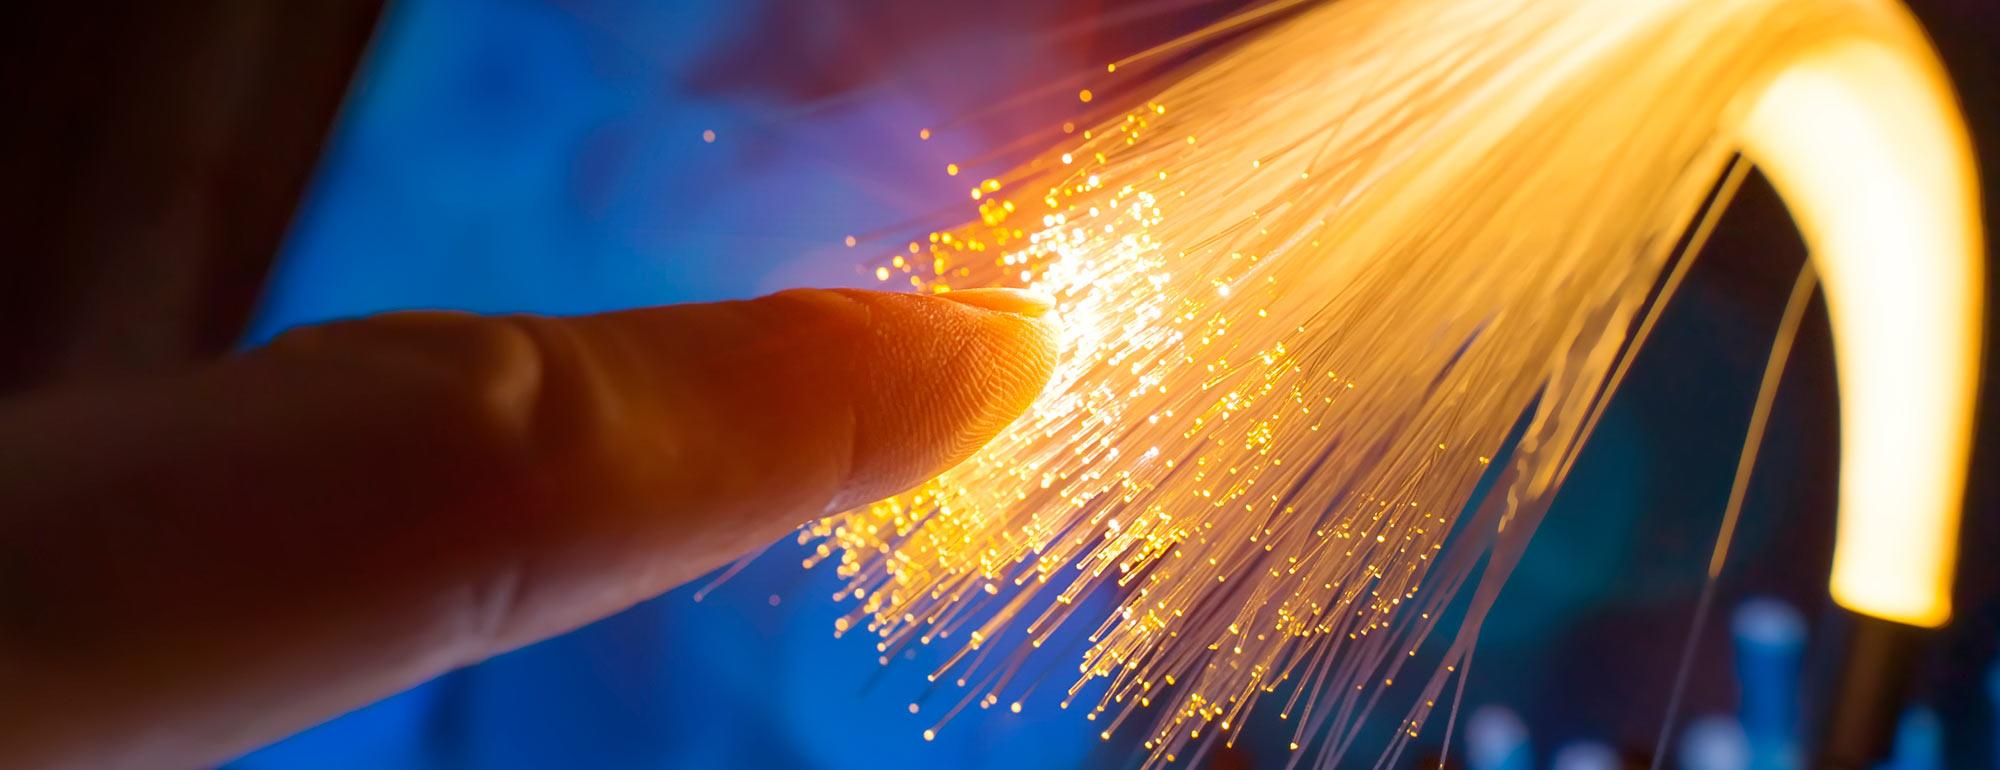 A person's finger touching the end of a bundle of illuminated fiber optic cables